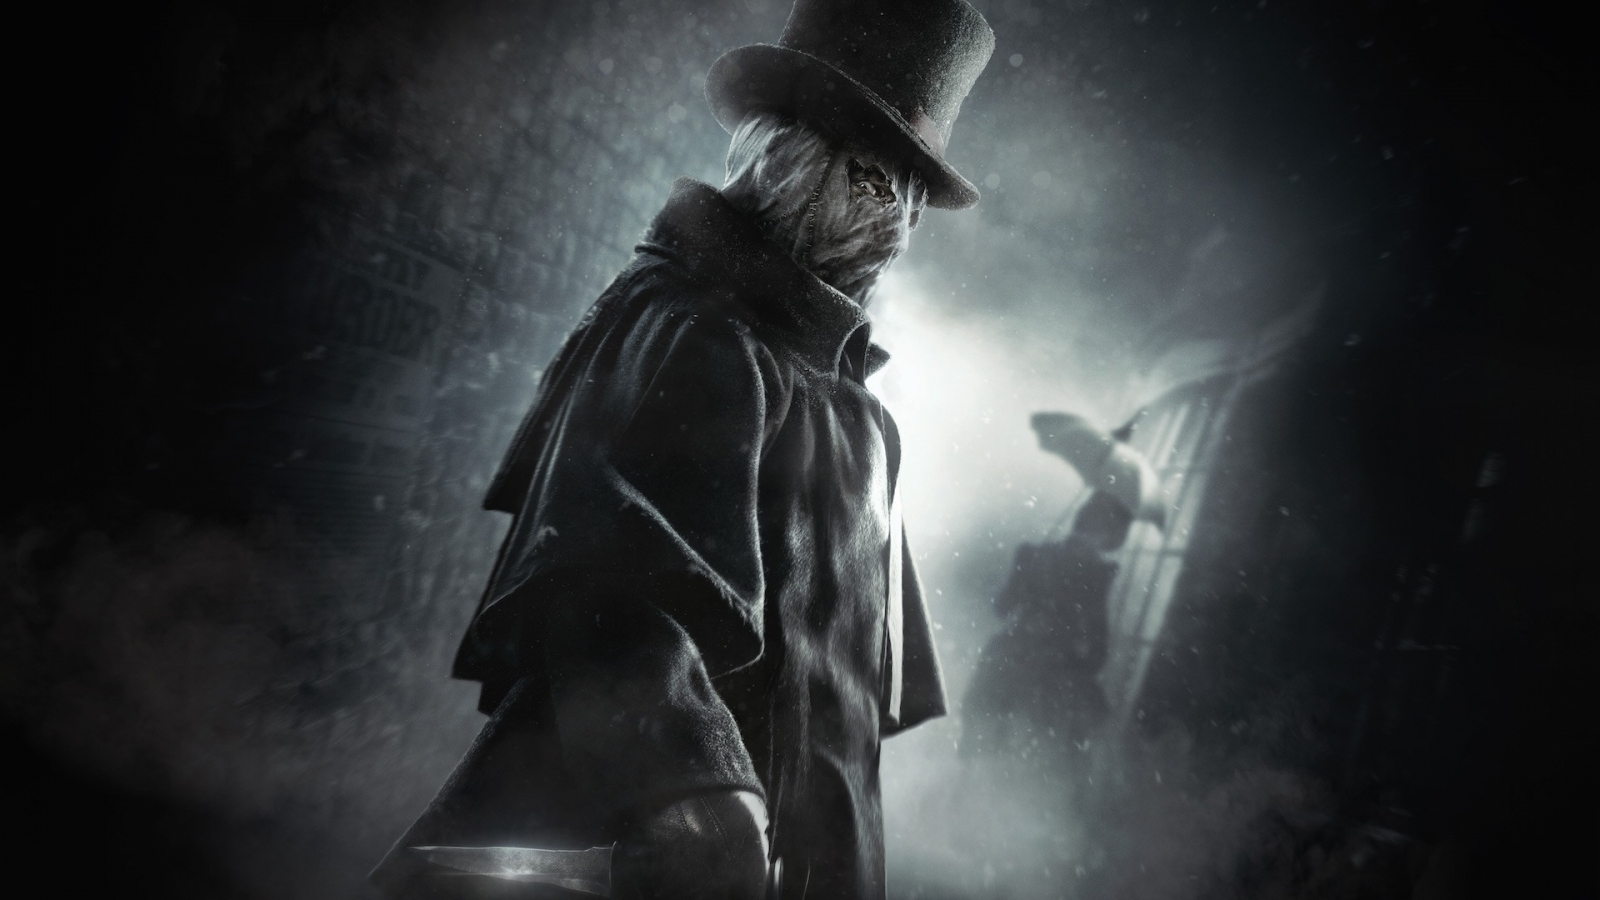 assassins creed syndicate ubisoft quebec syndicate jack The ripper 108478 3840x2160